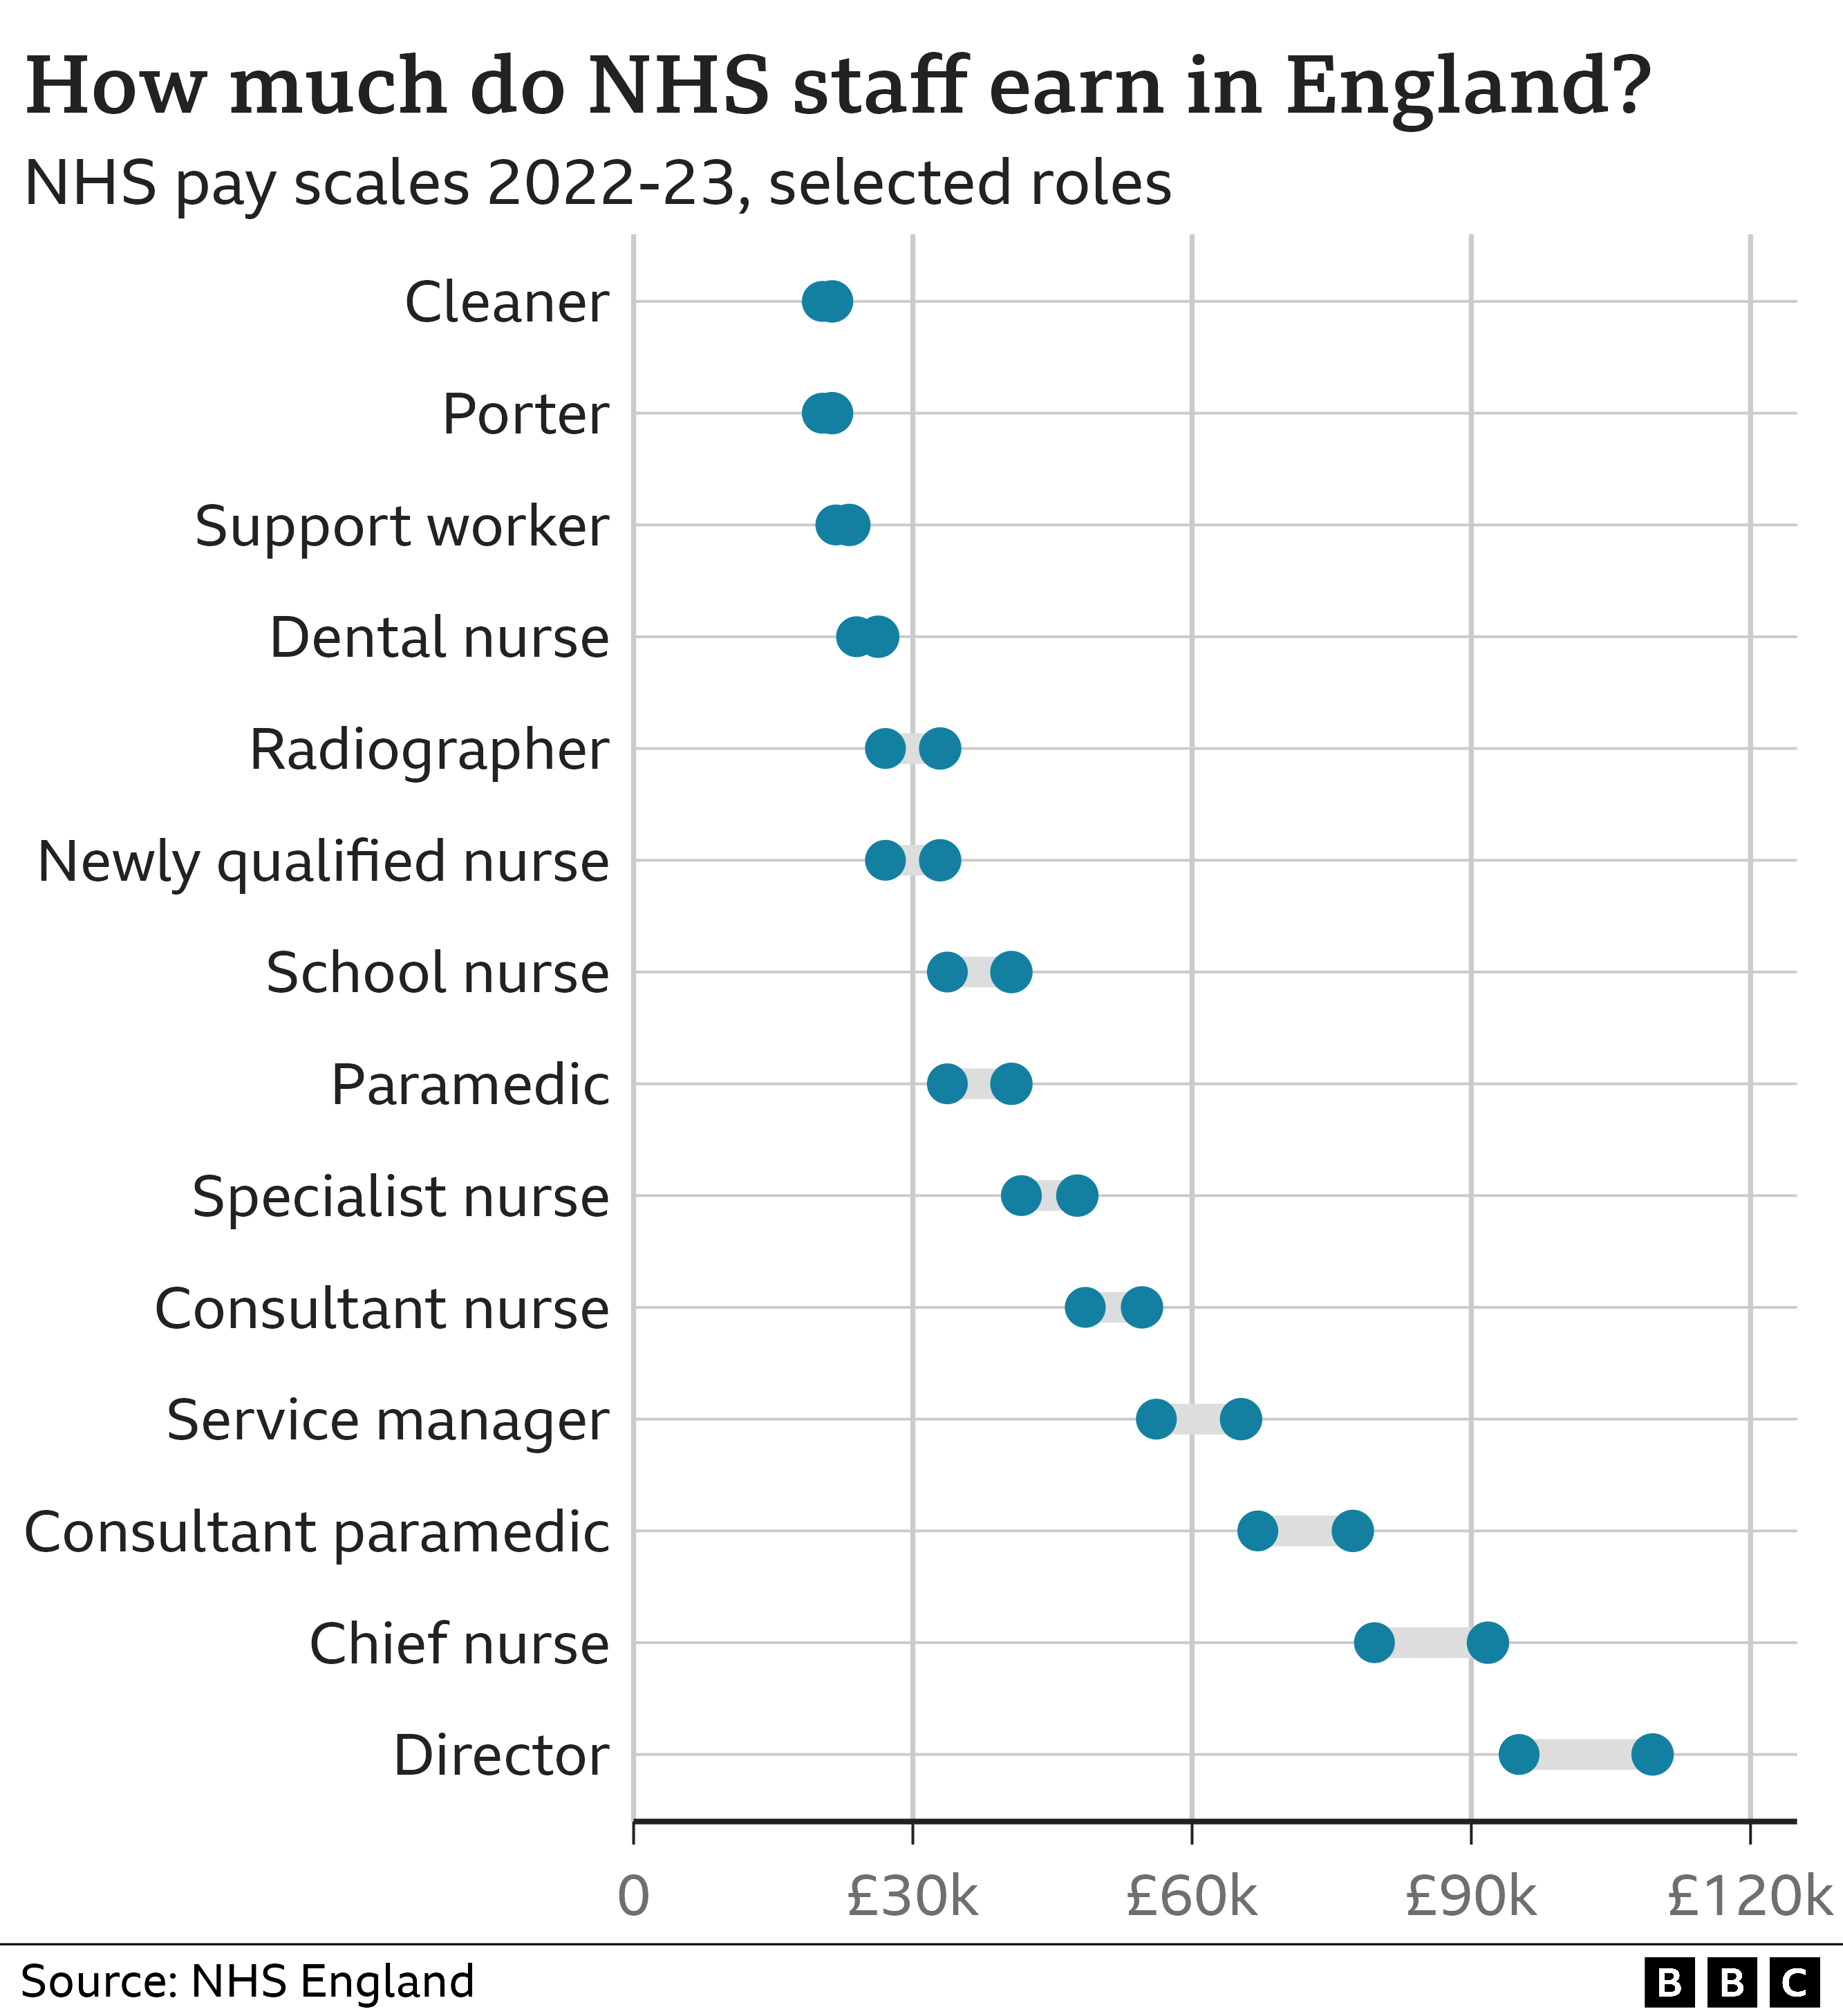 Graphic showing the pay scales for NHS staff in England in different roles - from cleaners earning £20,270 to £21,318 a year to directors earning £95,135 to £109,475